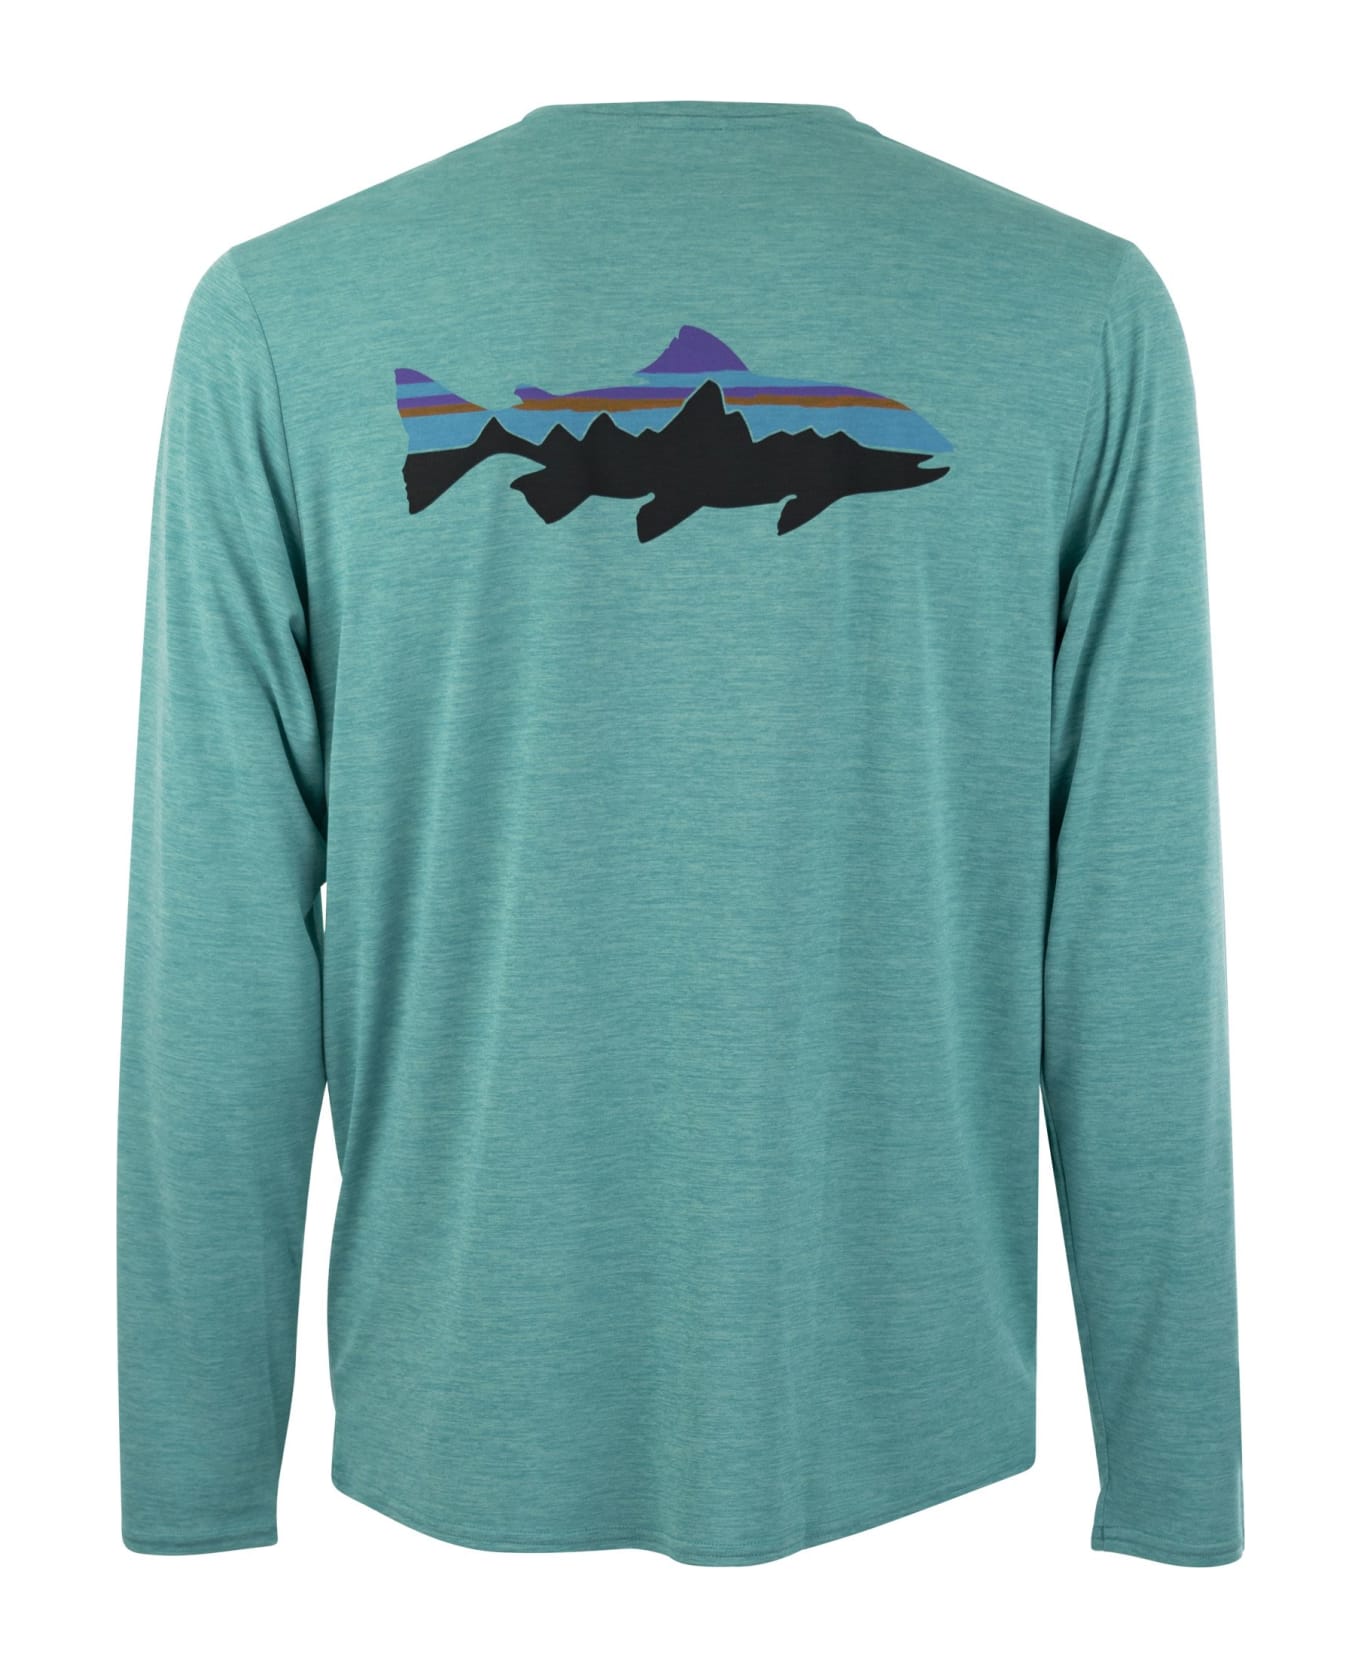 Patagonia Long-sleeved T-shirt With Logo - Water Green シャツ